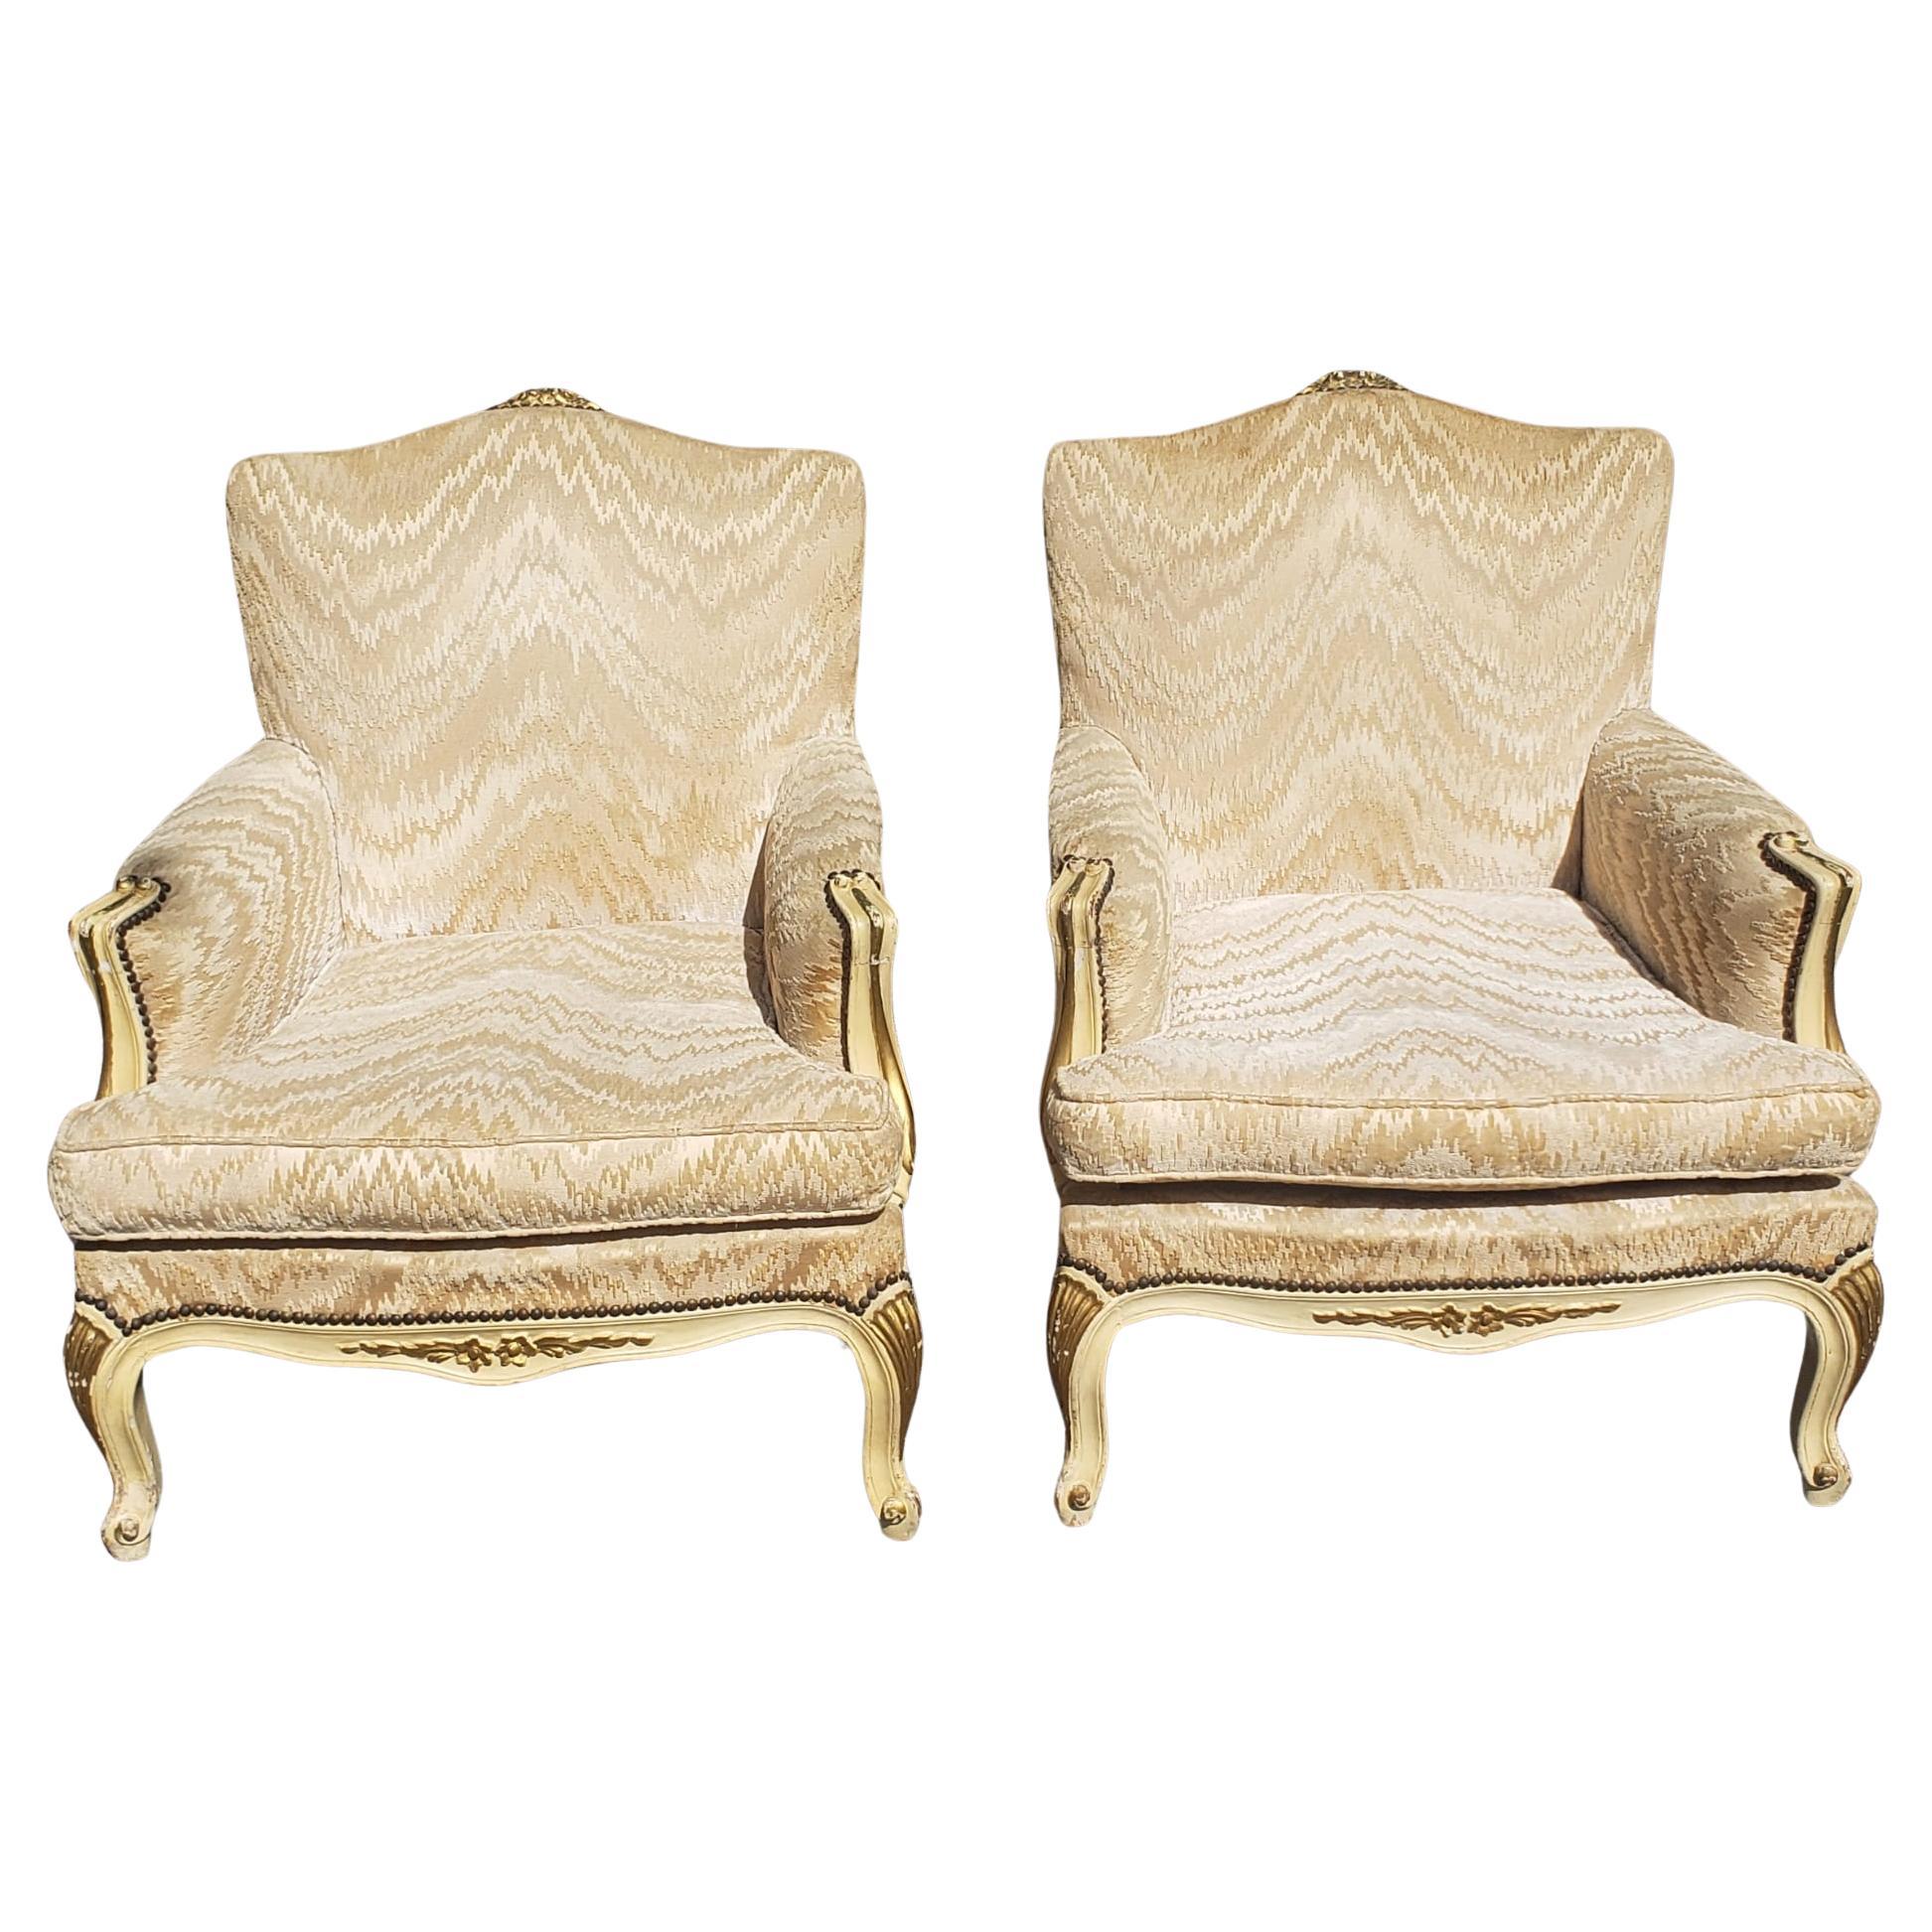 Pair of Louis XV Carved, Parcel Gilt and Upholstered Bergere Chairs